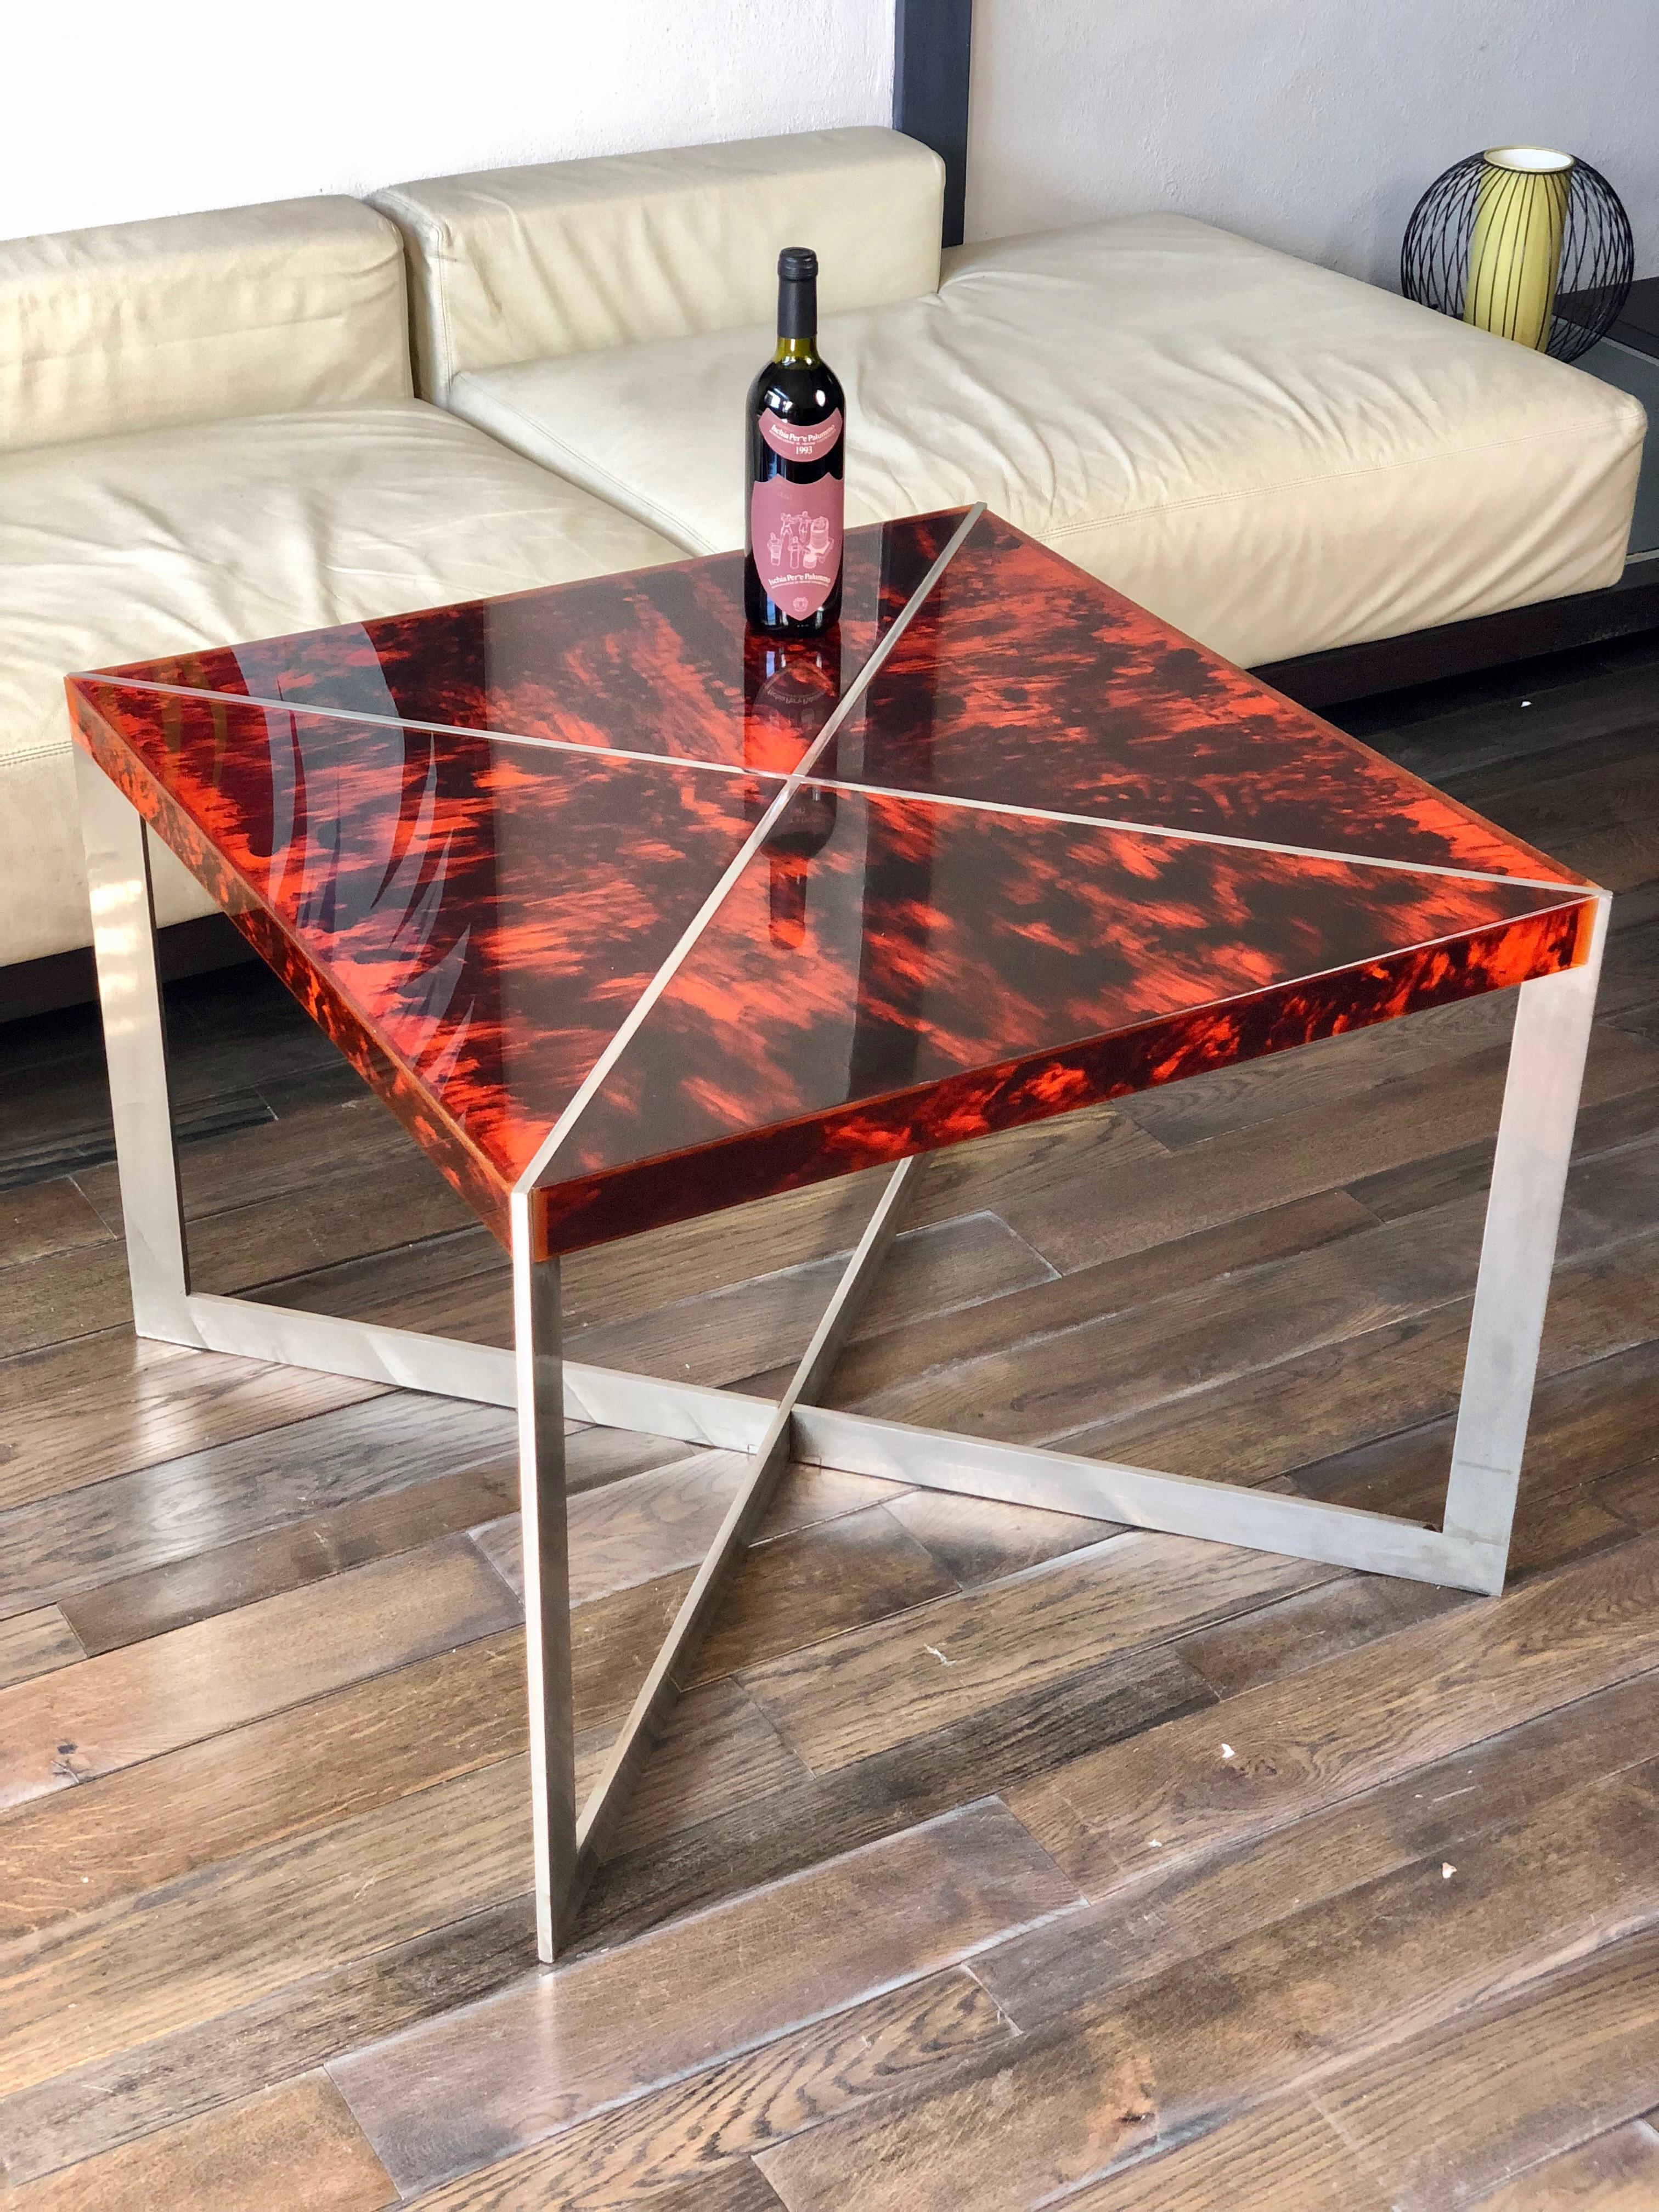 Squared Midcentury table made of a tortoiseshell Lucite surface and a chrome 